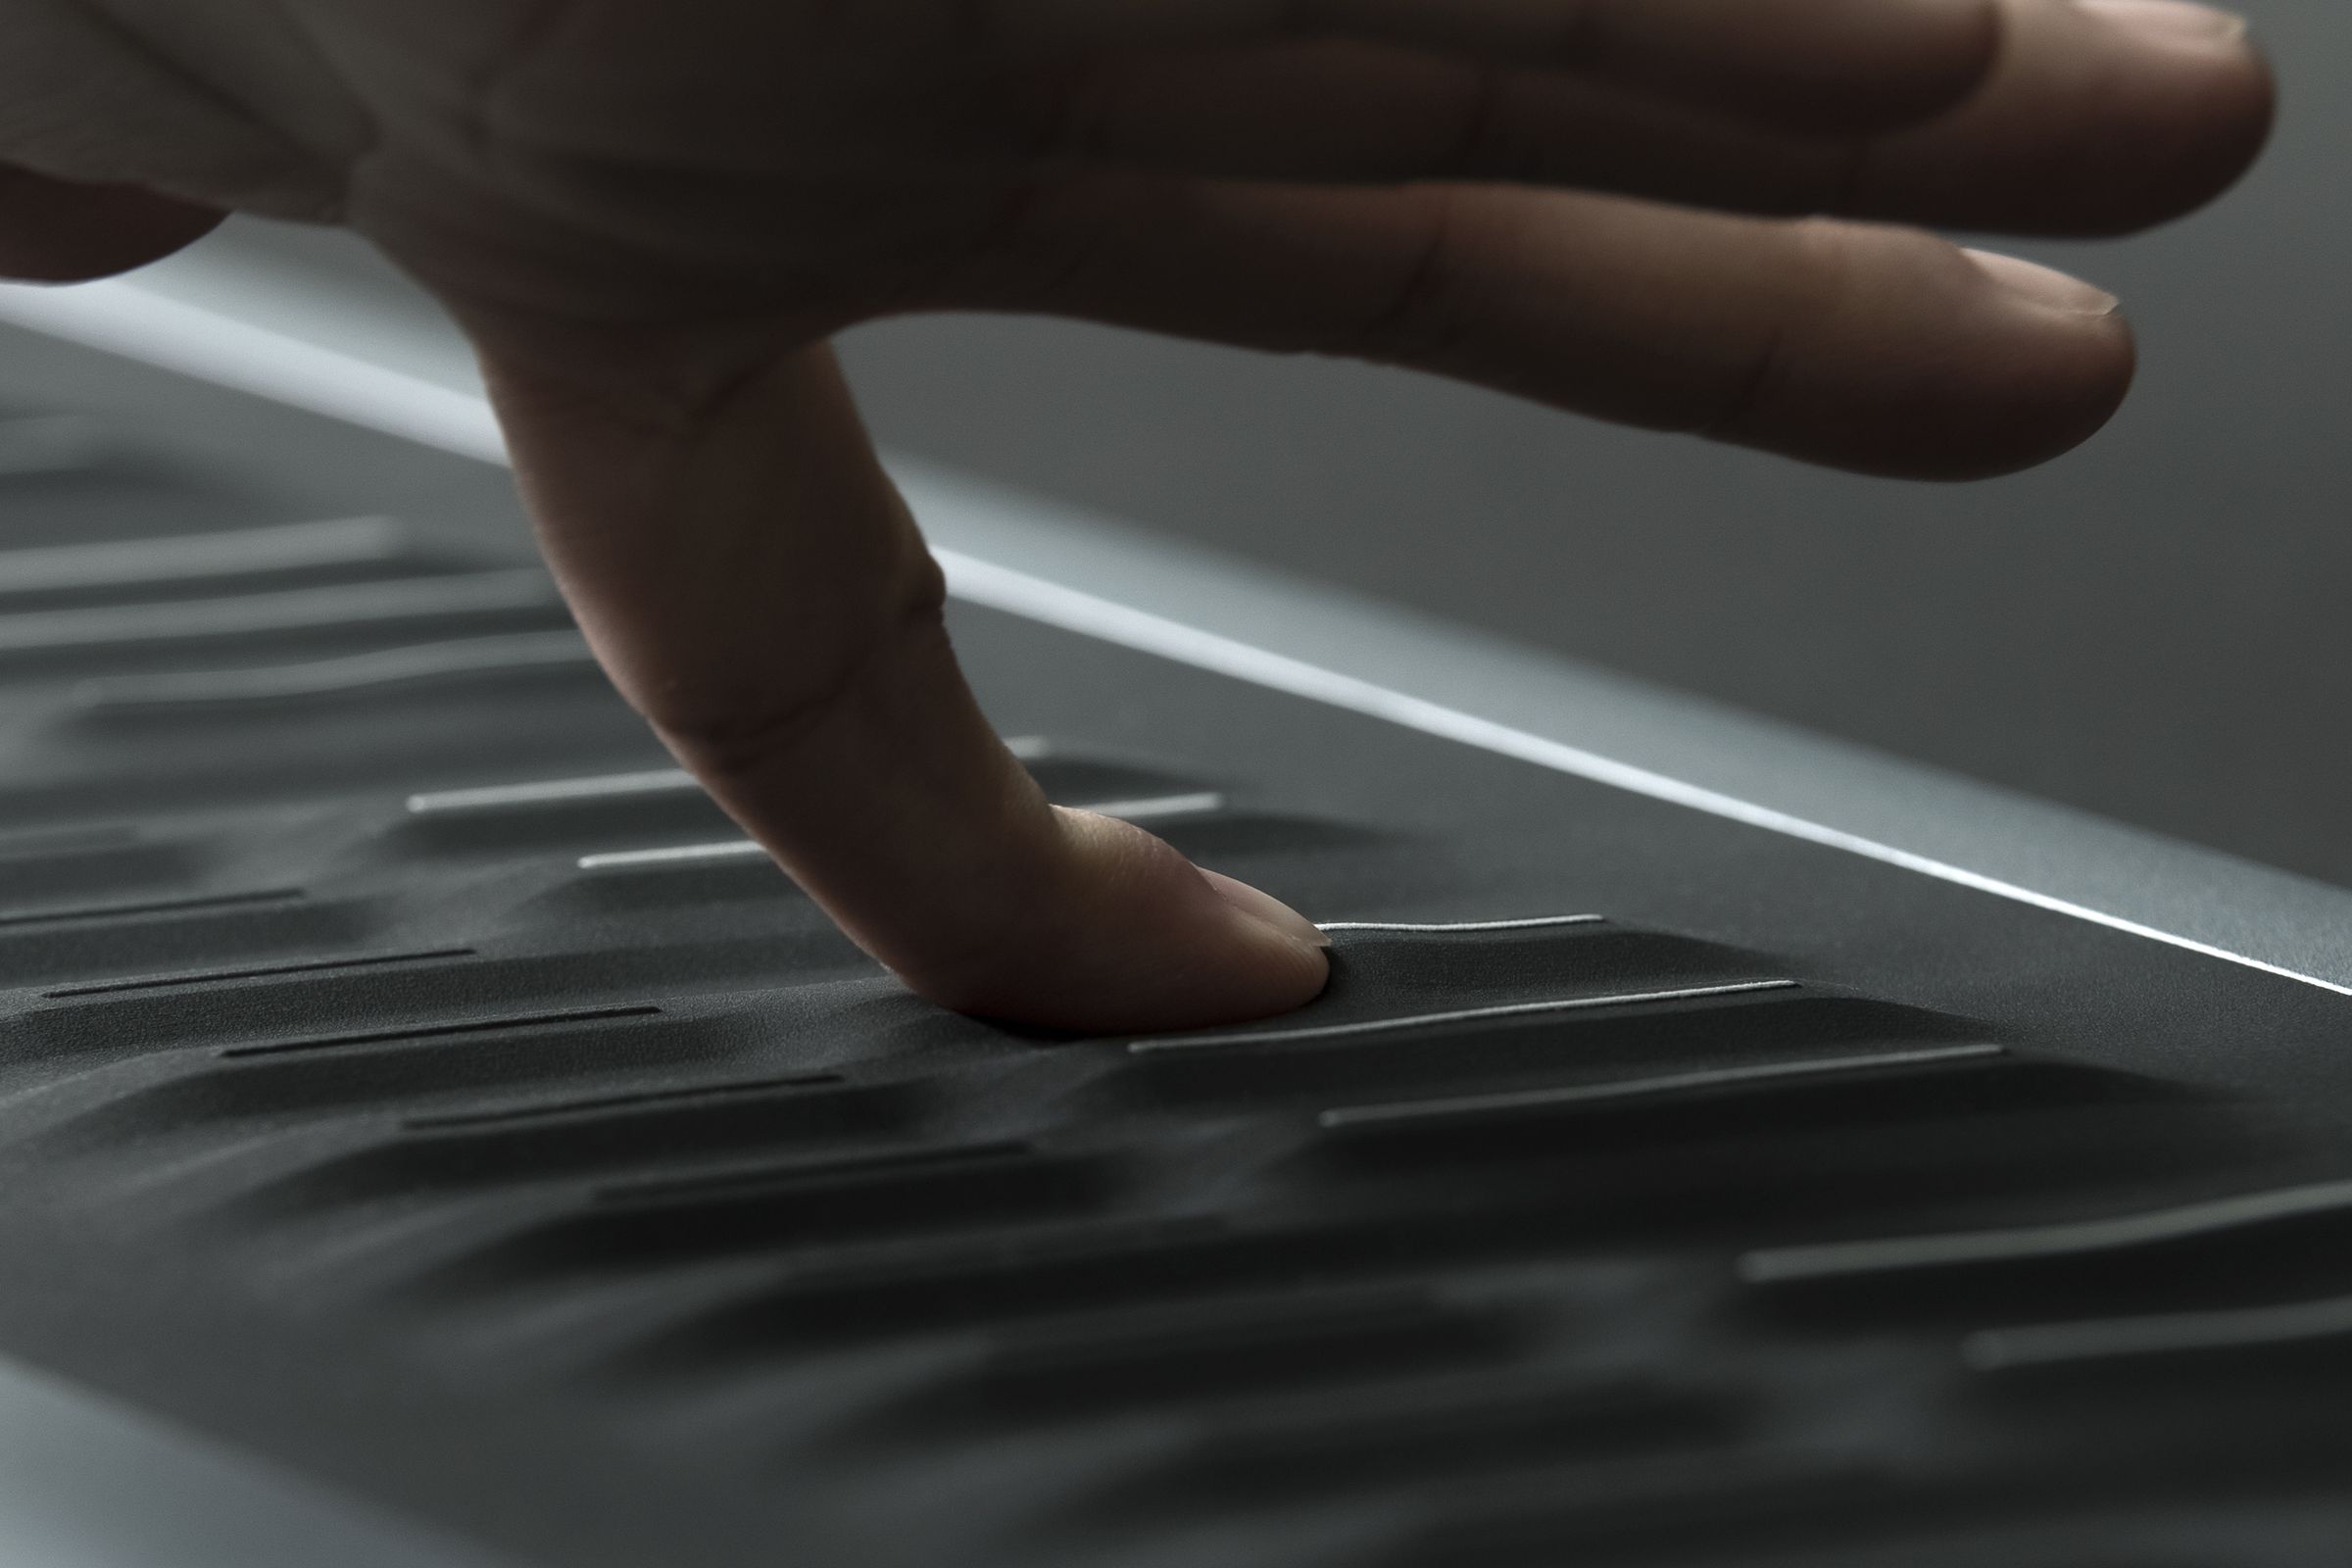 The big feature of the Seaboard Rise 2 is the addition of “frets” to each key, that let players feel their way across notes. 